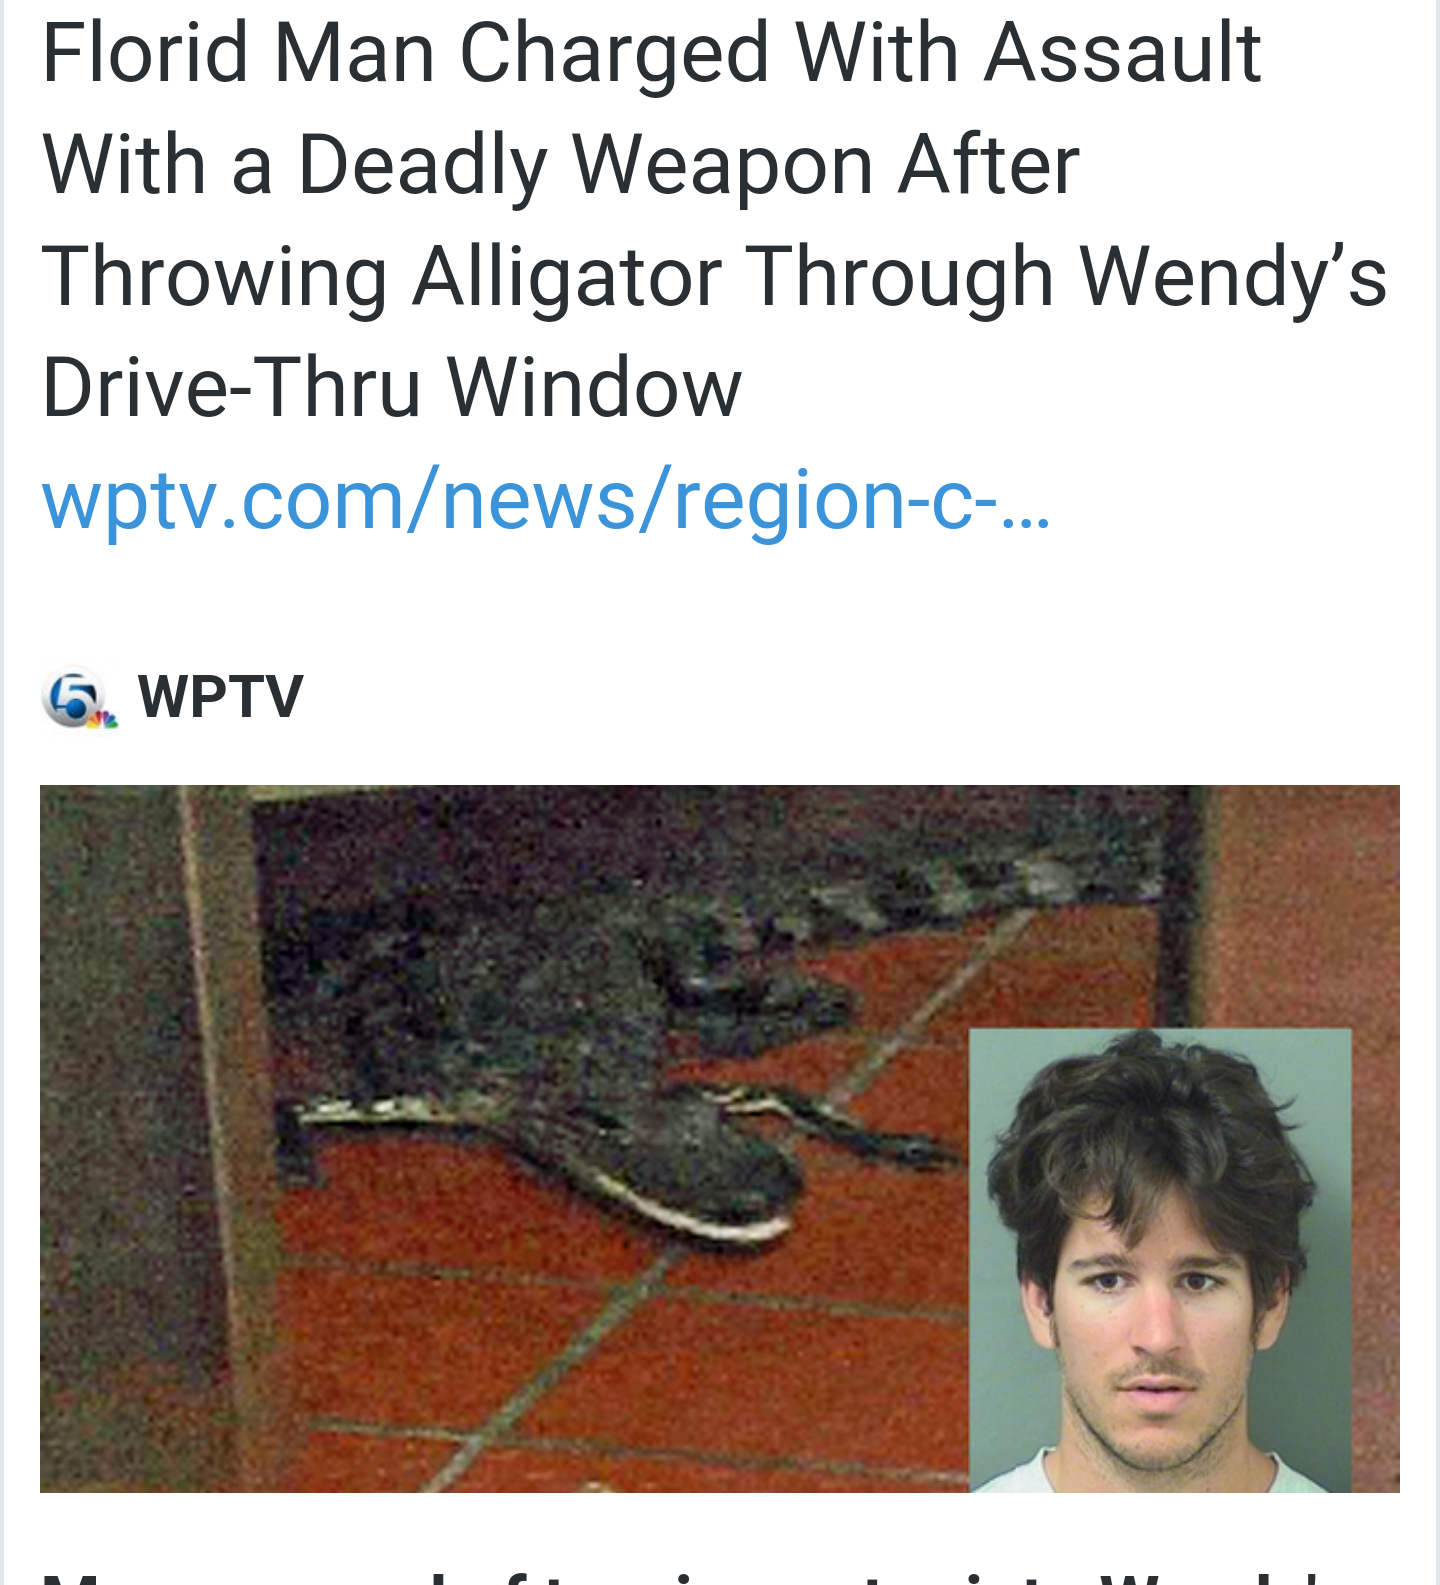 florida man headlines - Florid Man Charged With Assault With a Deadly Weapon After Throwing Alligator Through Wendy's DriveThru Window wptv.comnewsregionc... 6. Wptv